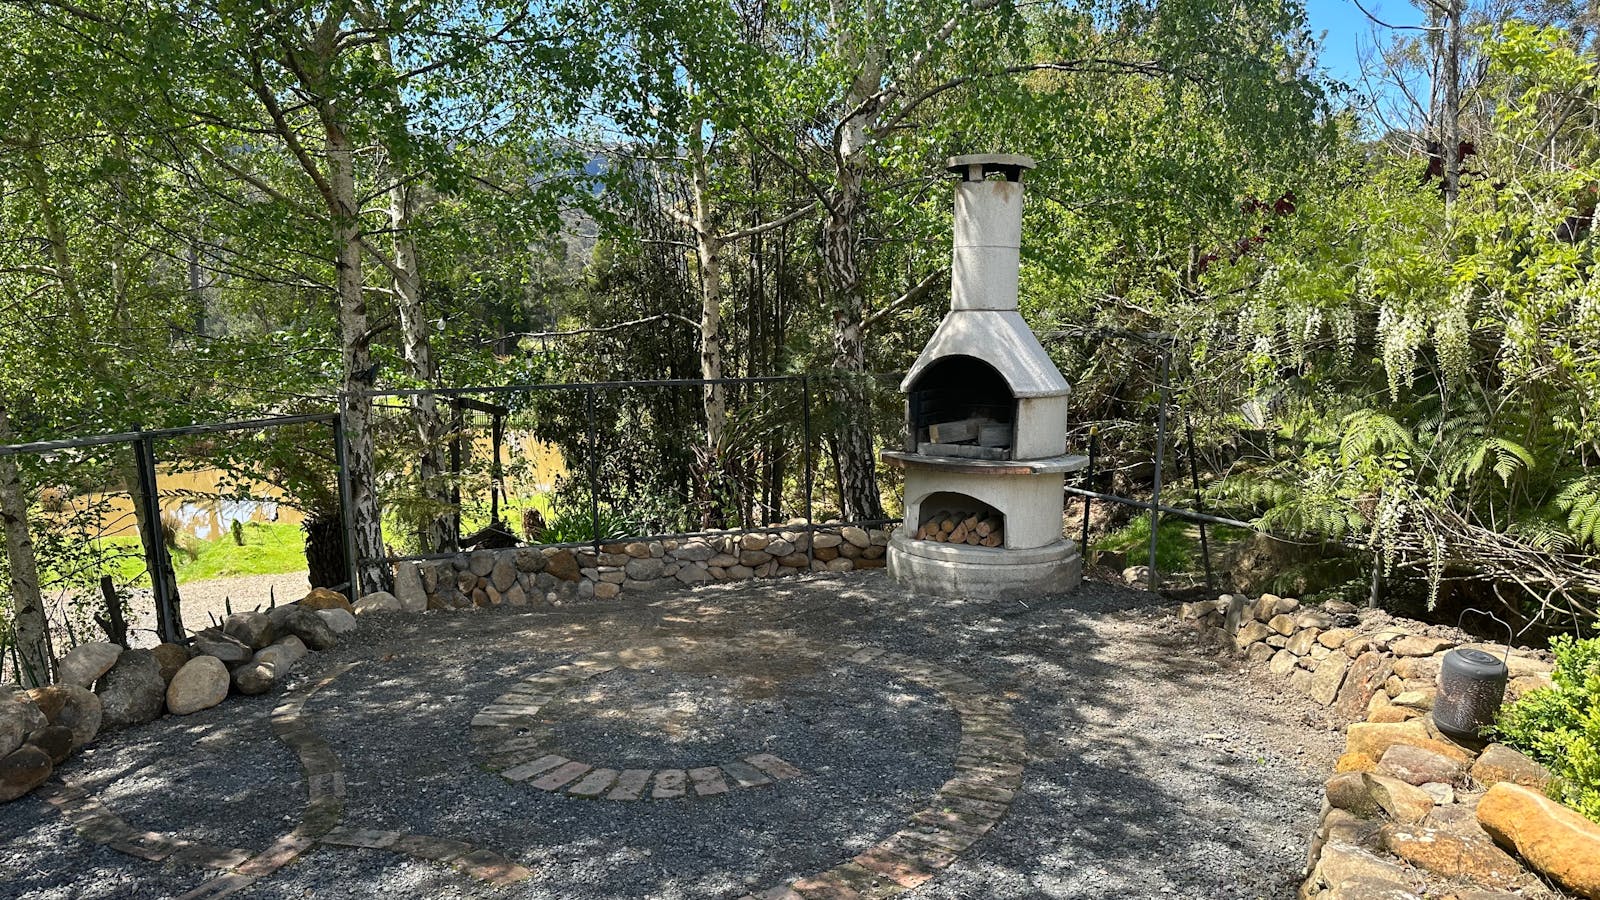 Wood fired pizza/bbq oven